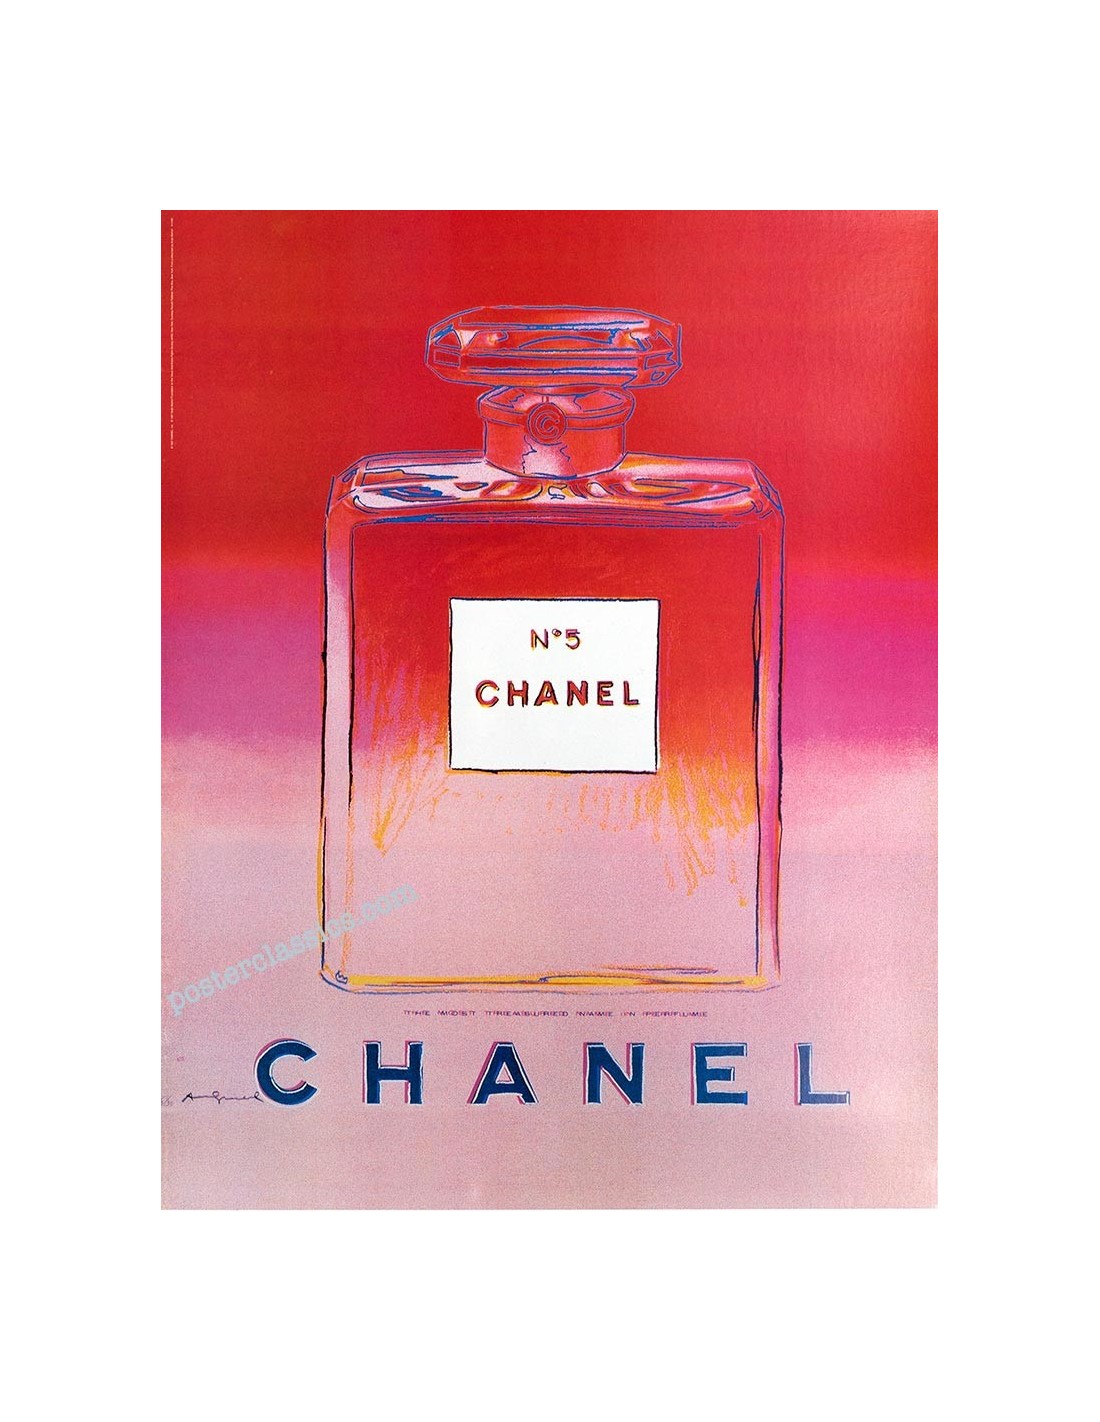 Andy Warhol Chanel N5 poster, Andy Warhol Popart poster, Andy Warhol ...